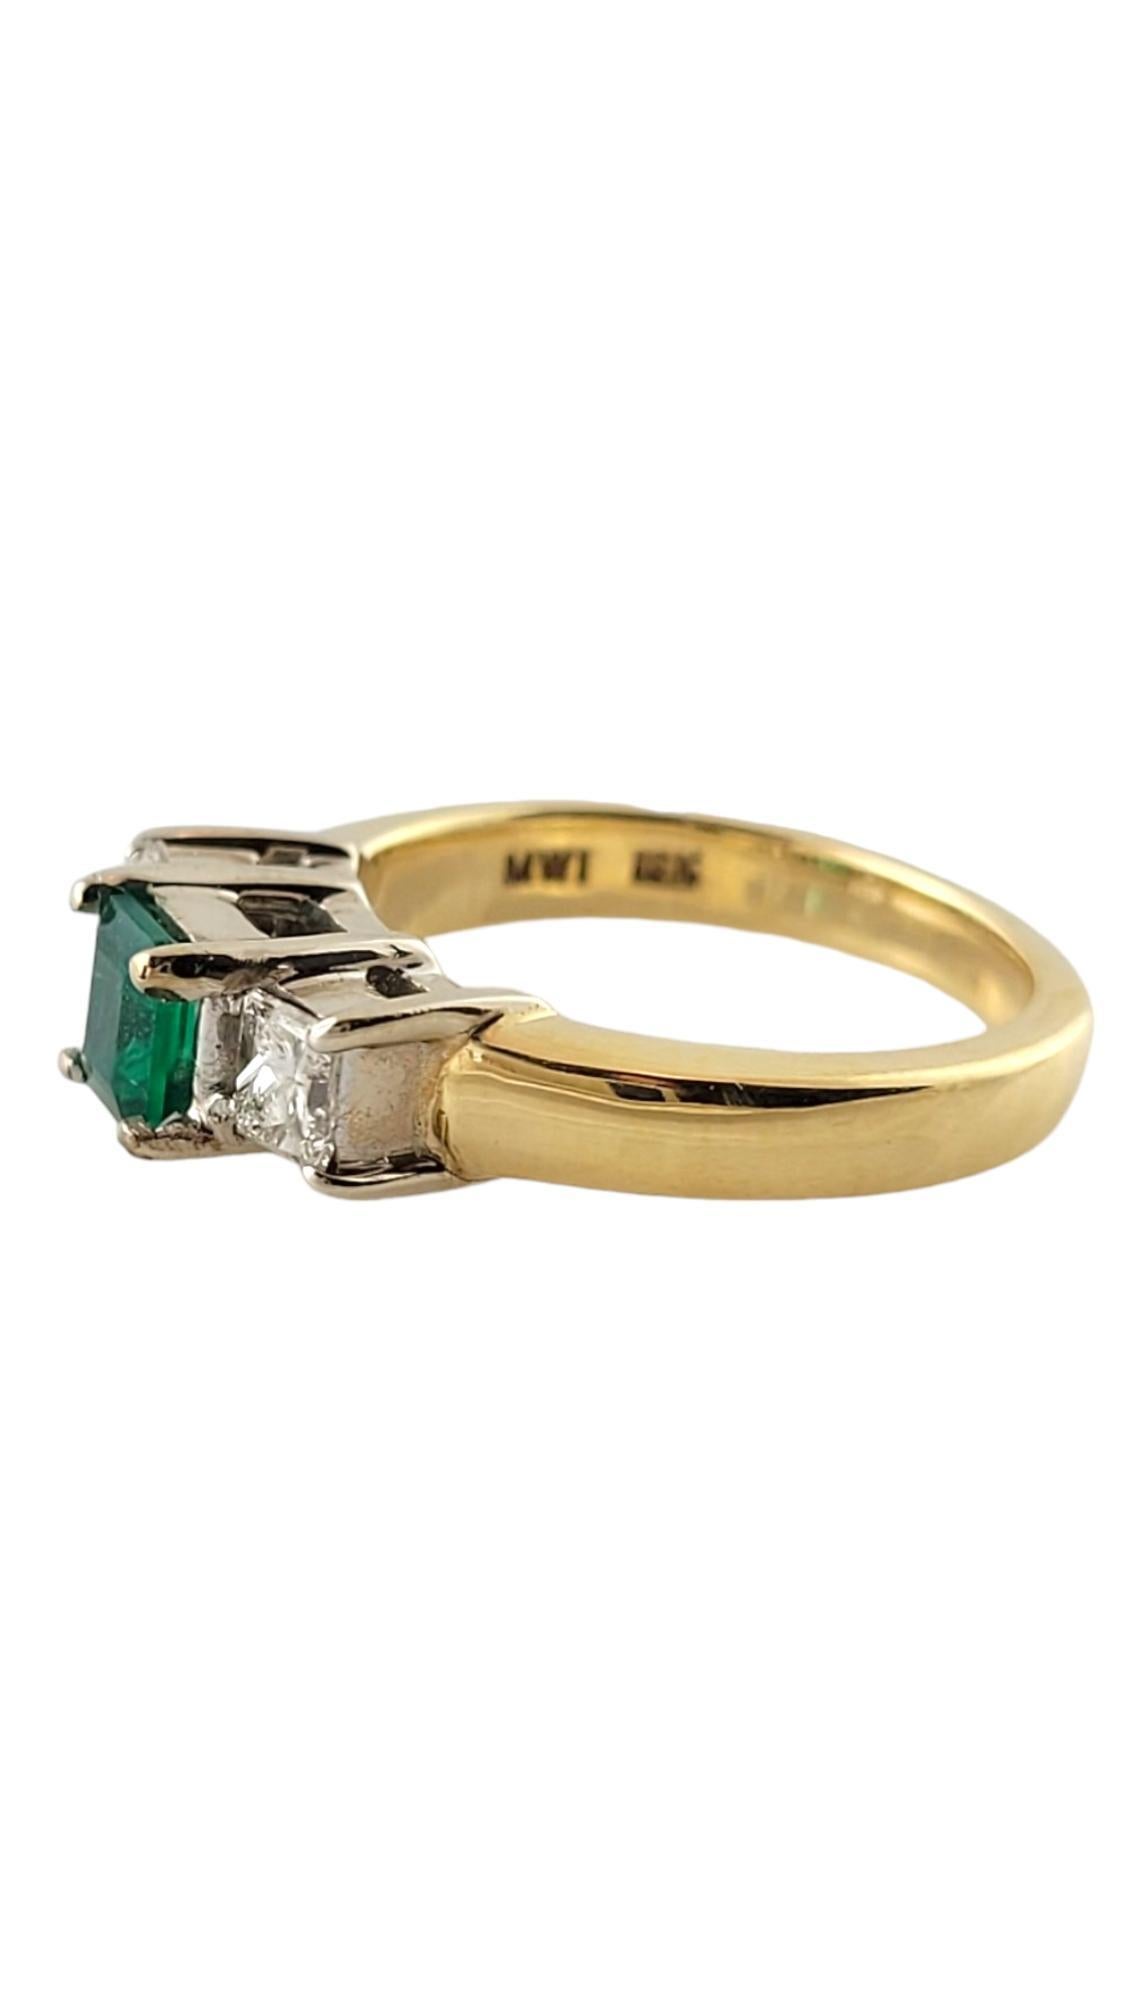 18 Karat Yellow Gold Natural Emerald and Diamond Ring Size 5.5

This lovely ring features one genuine emerald (approx. 5 mm x 4 mm) and two princess cut diamonds set in classic 18K yellow gold.  

Shank measures 2.5 mm.

Approximate total diamond